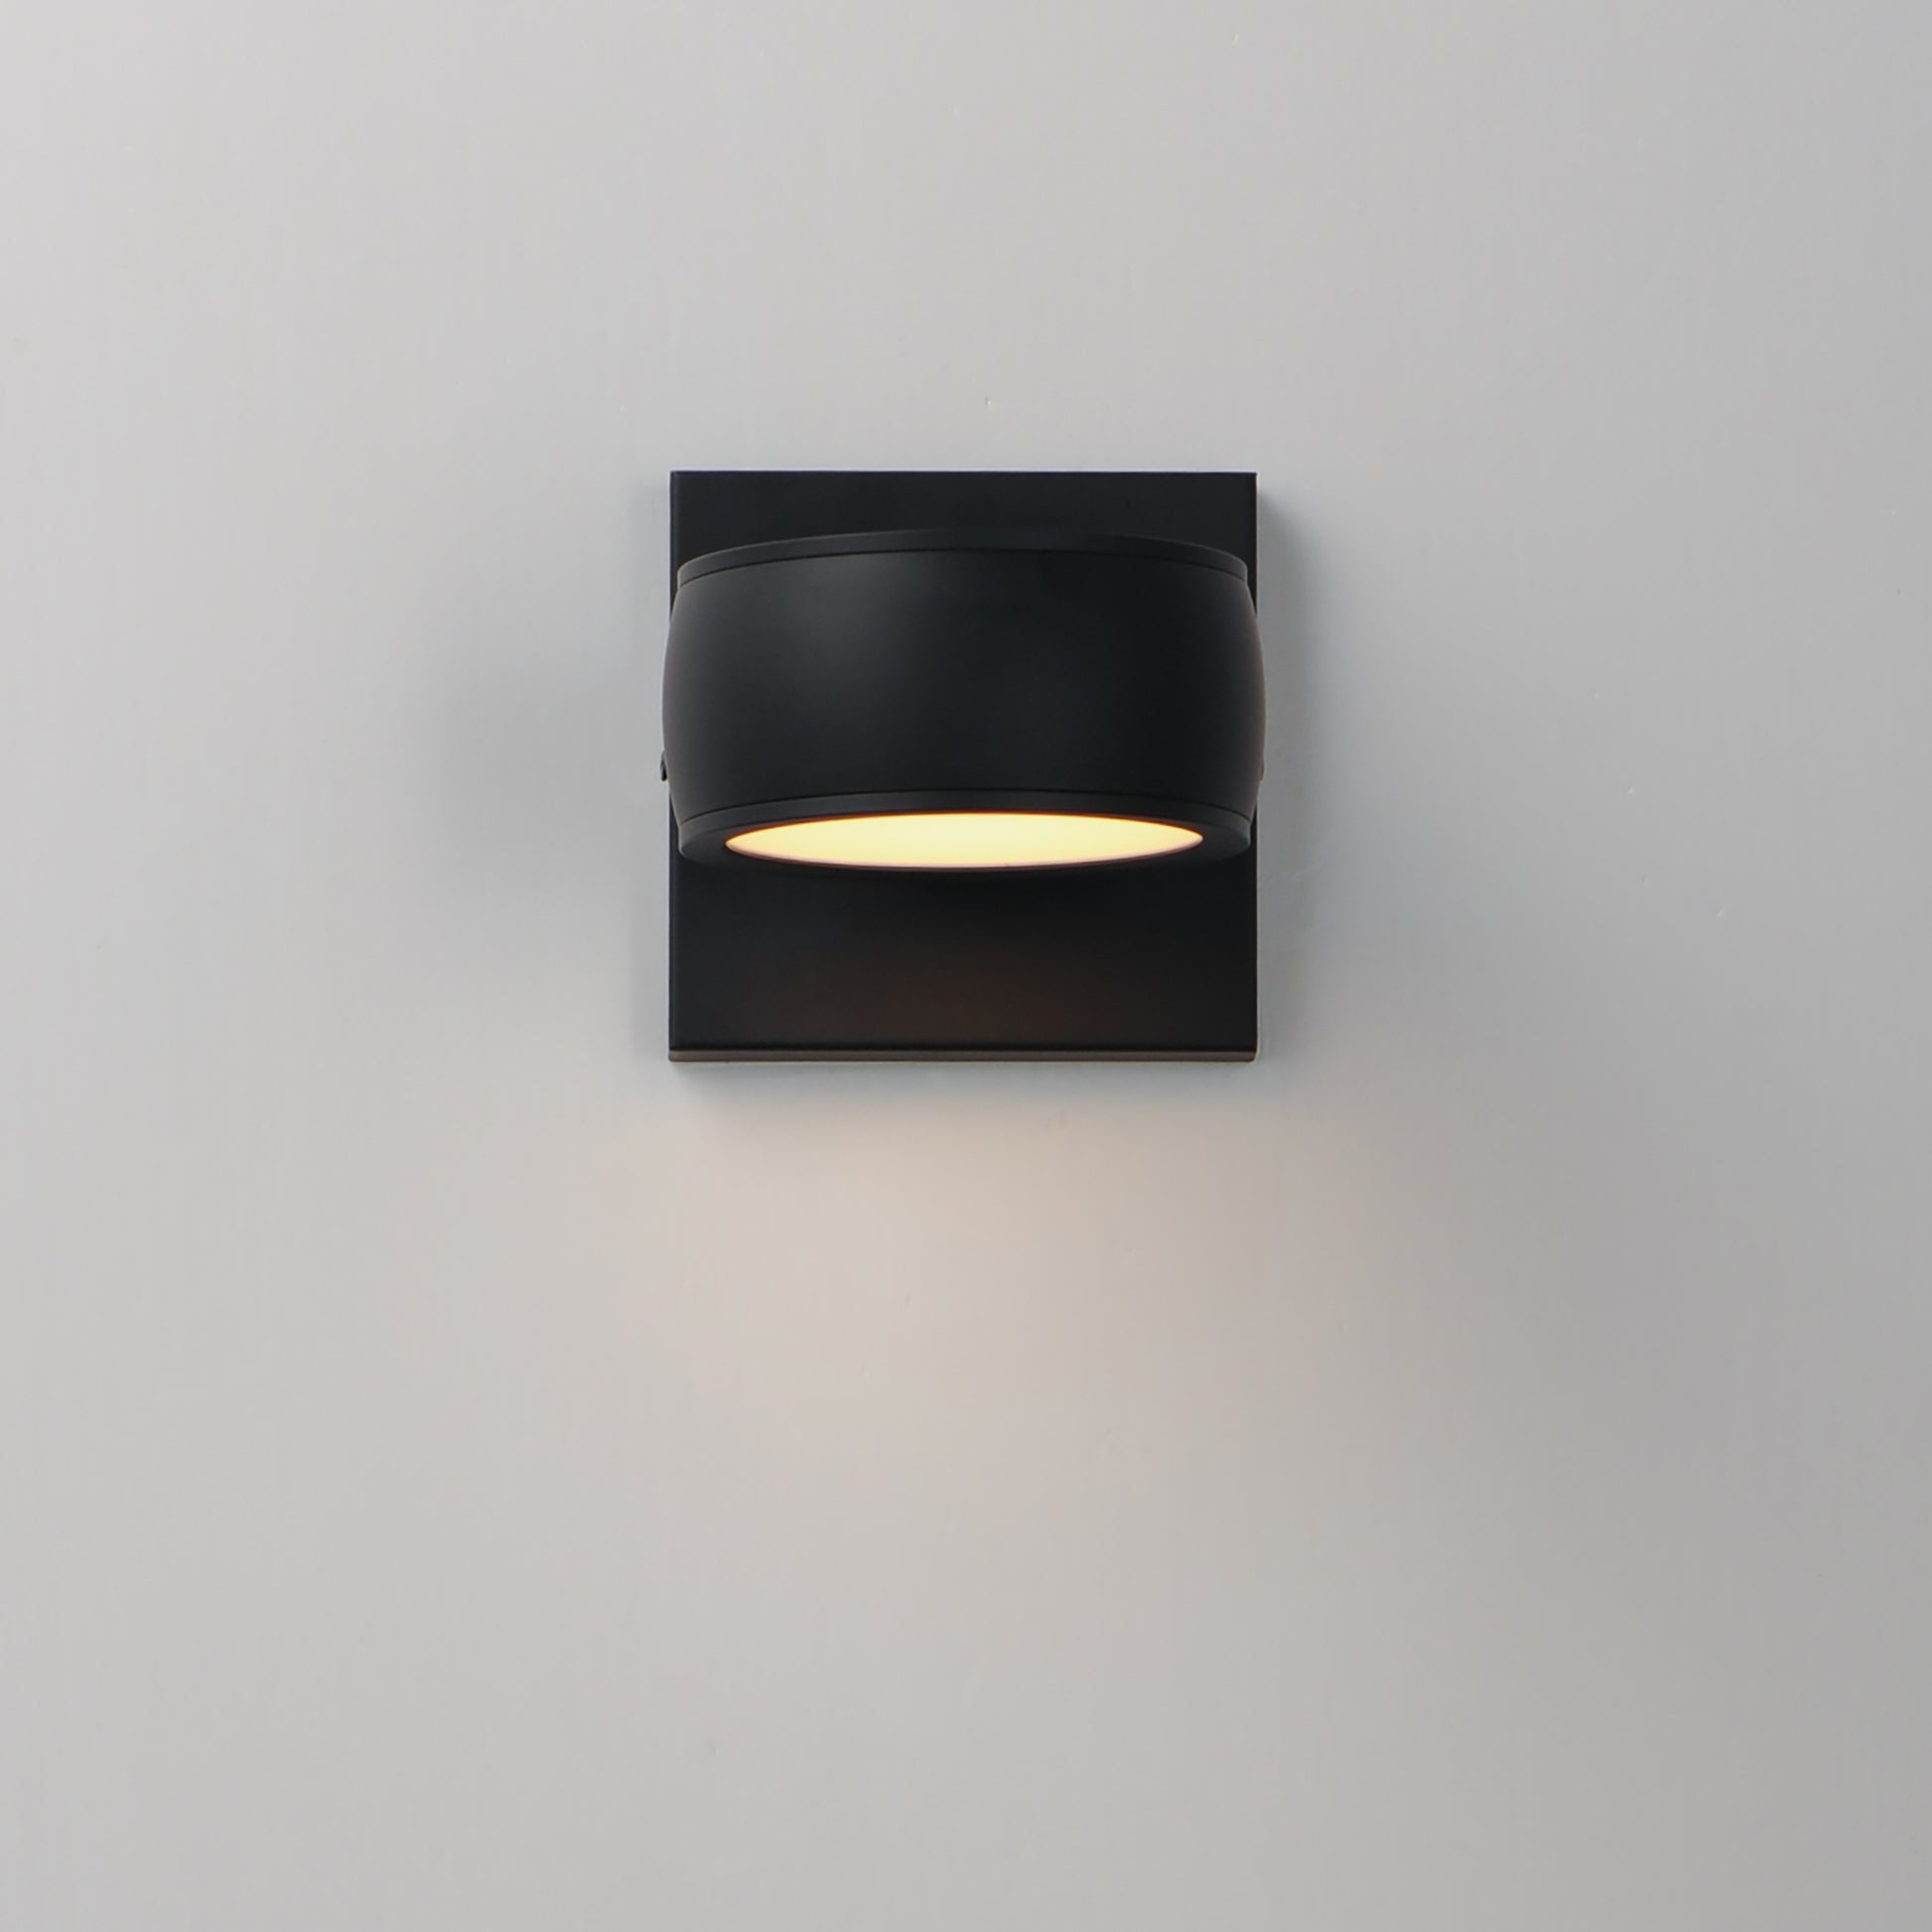 ET2 Modular LED Outdoor Wall Sconce